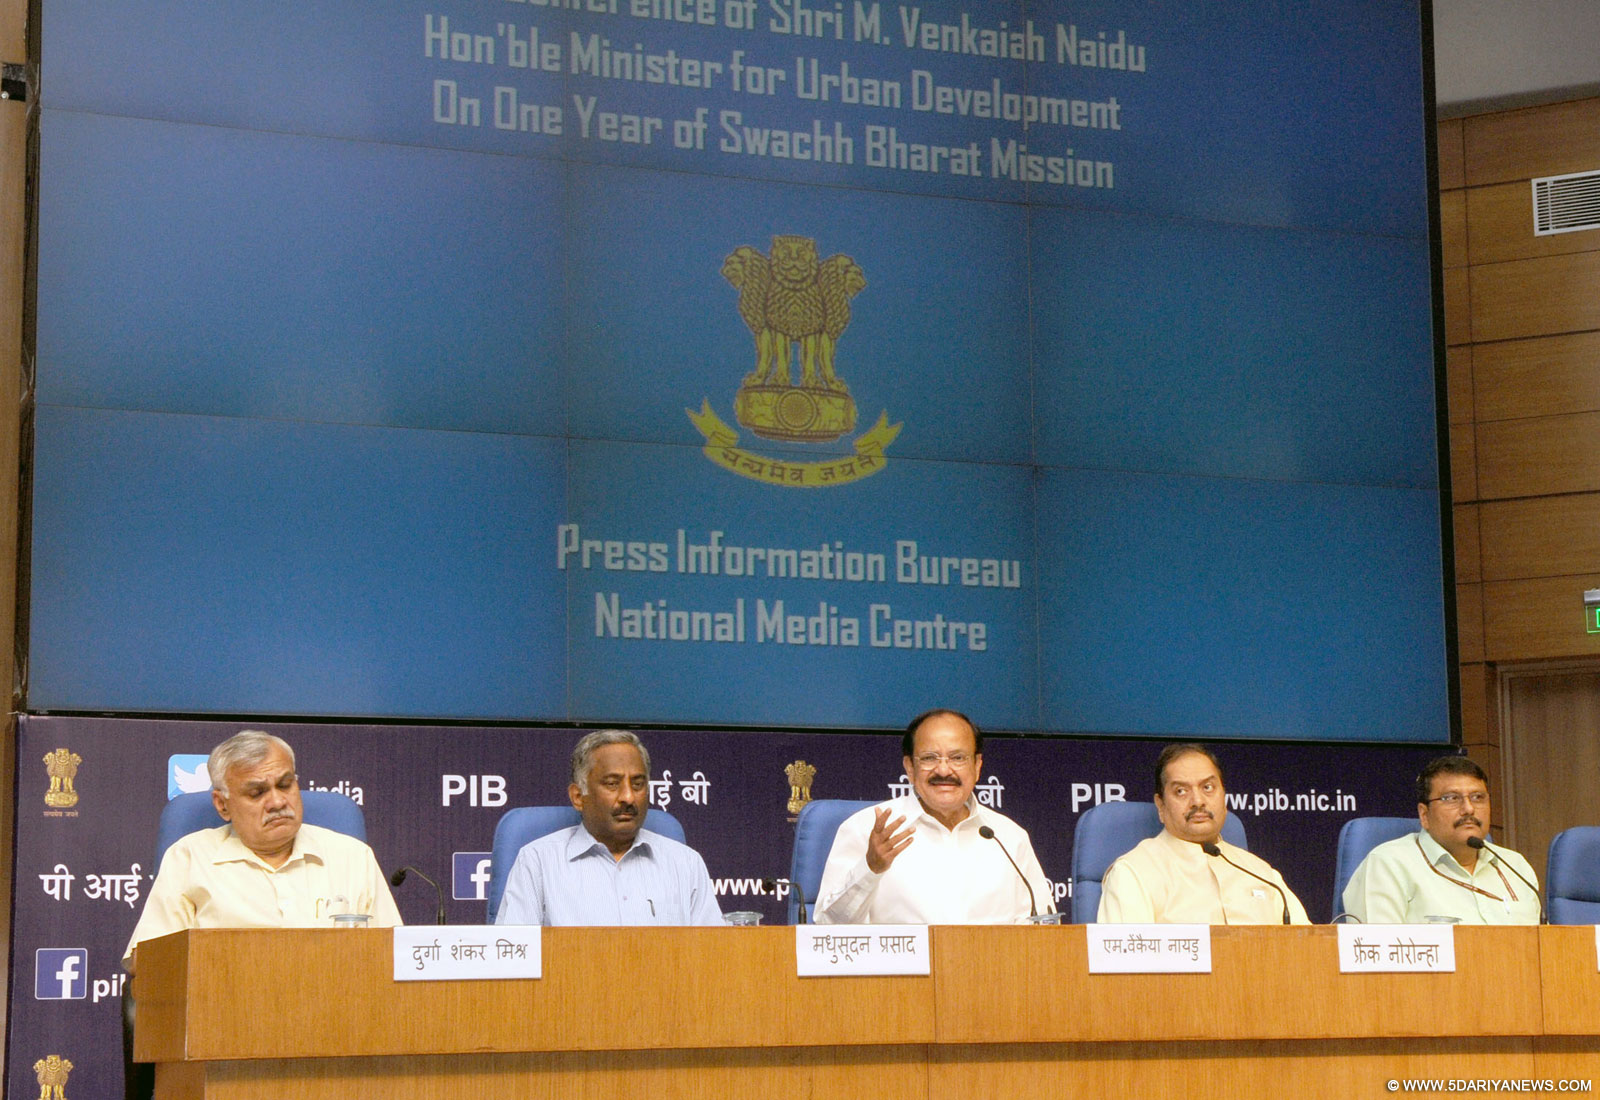 The Union Minister for Urban Development, Housing and Urban Poverty Alleviation and Parliamentary Affairs, Shri M. Venkaiah Naidu a press addressing the media on one year of the Swachh Bharat Mission, in New Delhi on October 01, 2015. The Secretary, Ministry of Urban Development, Shri Madhusudhan Prasad, the Director General (M&C), Press Information Bureau, Shri A.P. Frank Noronha and other dignitaries are also seen. 